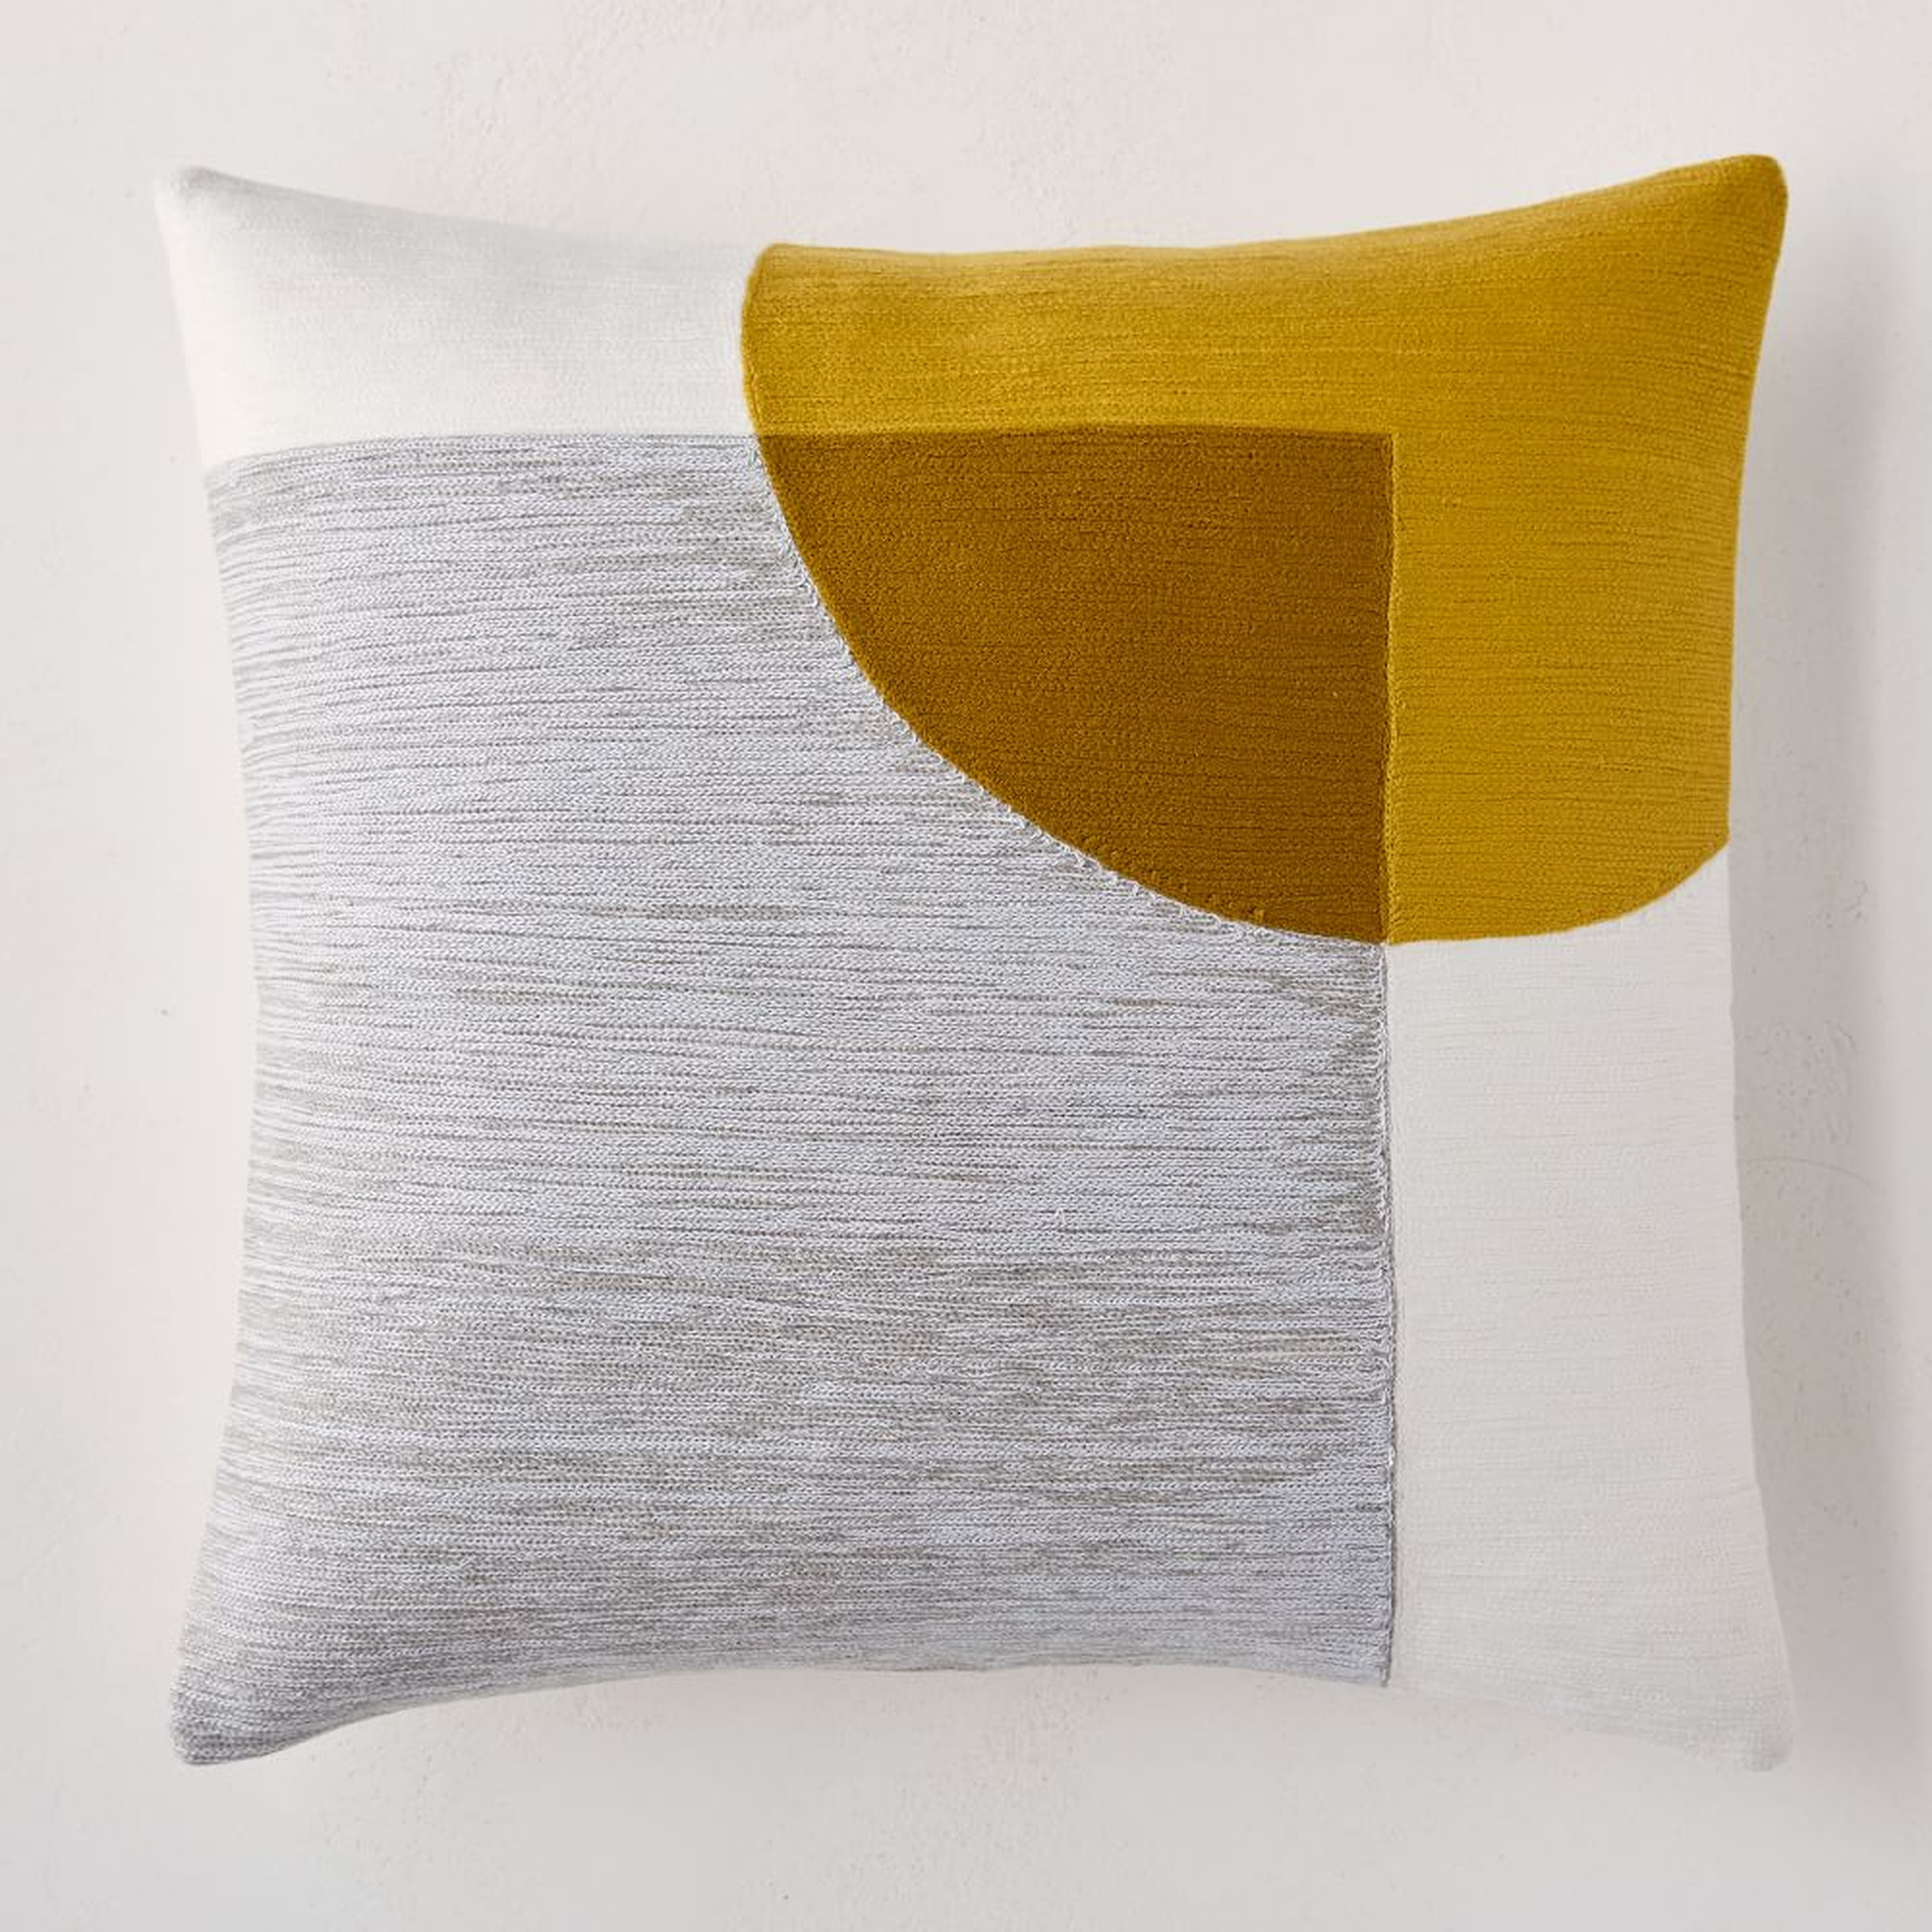 Crewel Overlapping Shapes Pillow Cover, 18"x18", Pearl Gray - West Elm